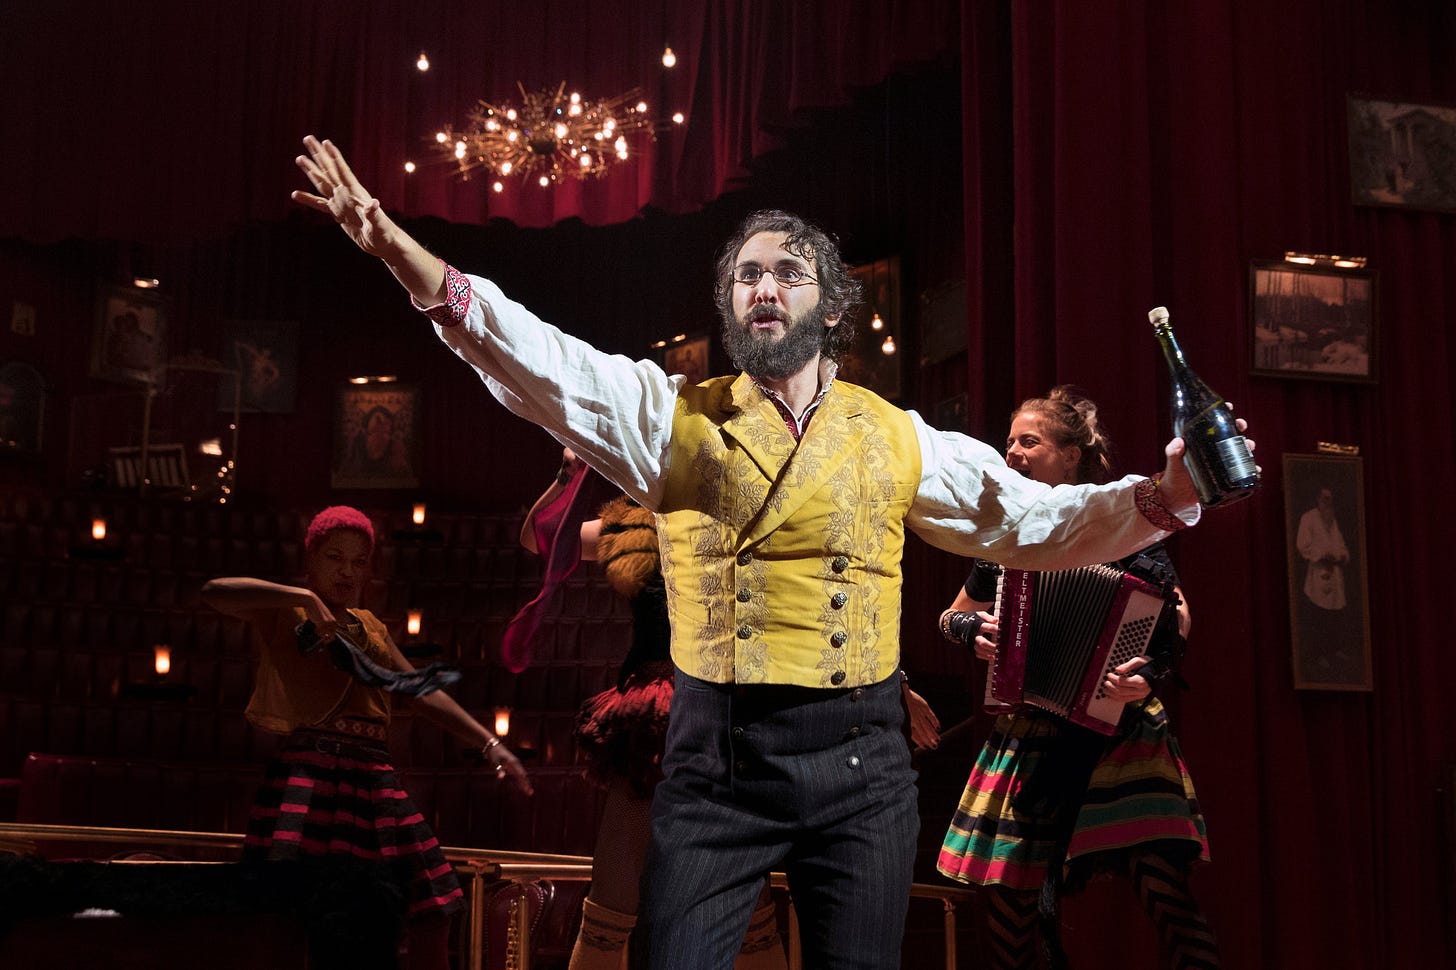 Josh Groban, a dark haired man with a beard and in a yellow waistcoat, with his arms open and holding a bottle of wine